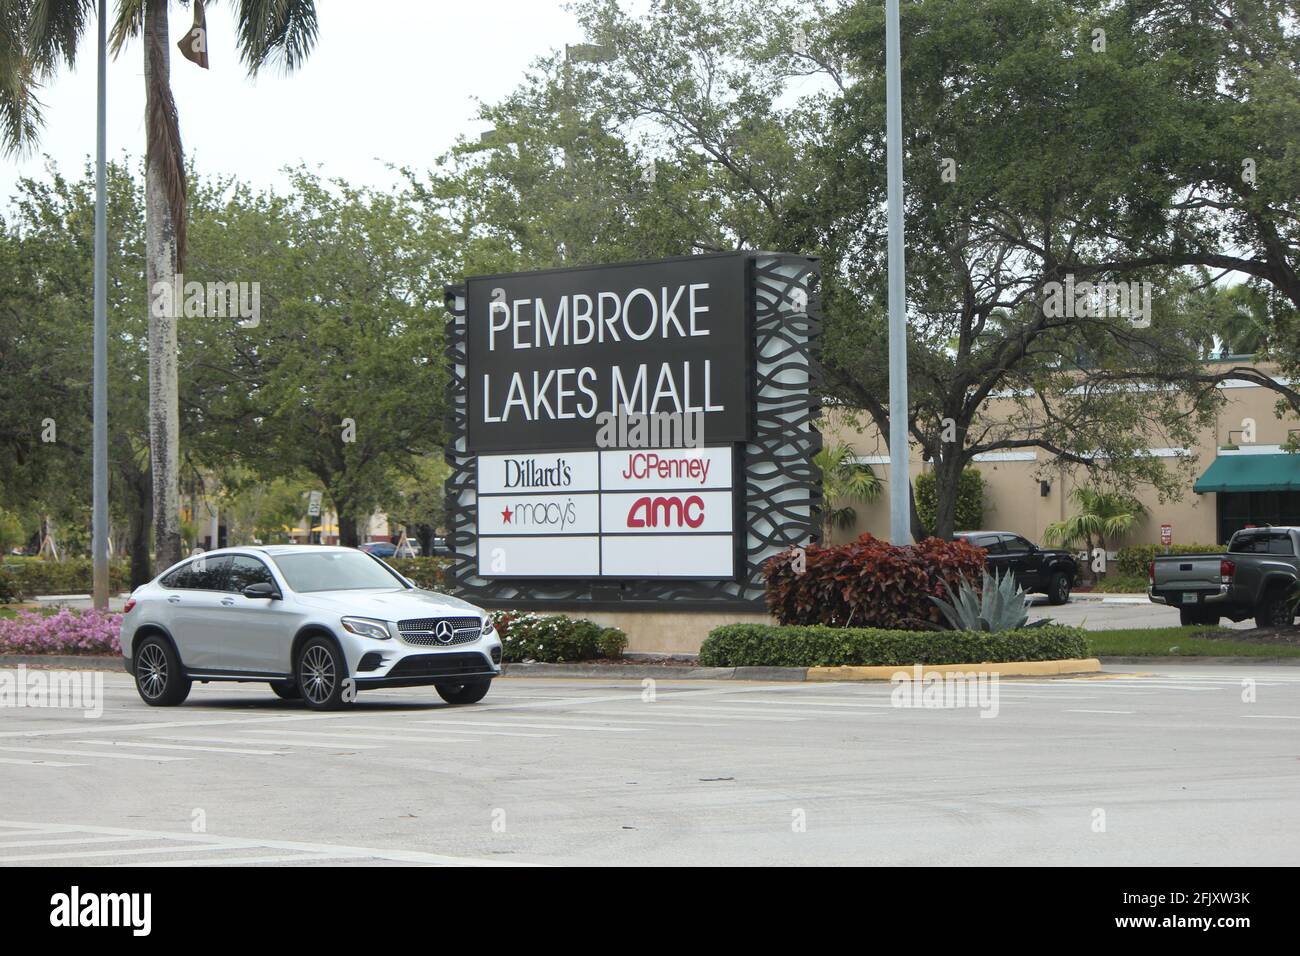 Pembroke Lakes Mall sign in Pembroke Pines Florida and a Mercedes Benz SUV car. Stock Photo